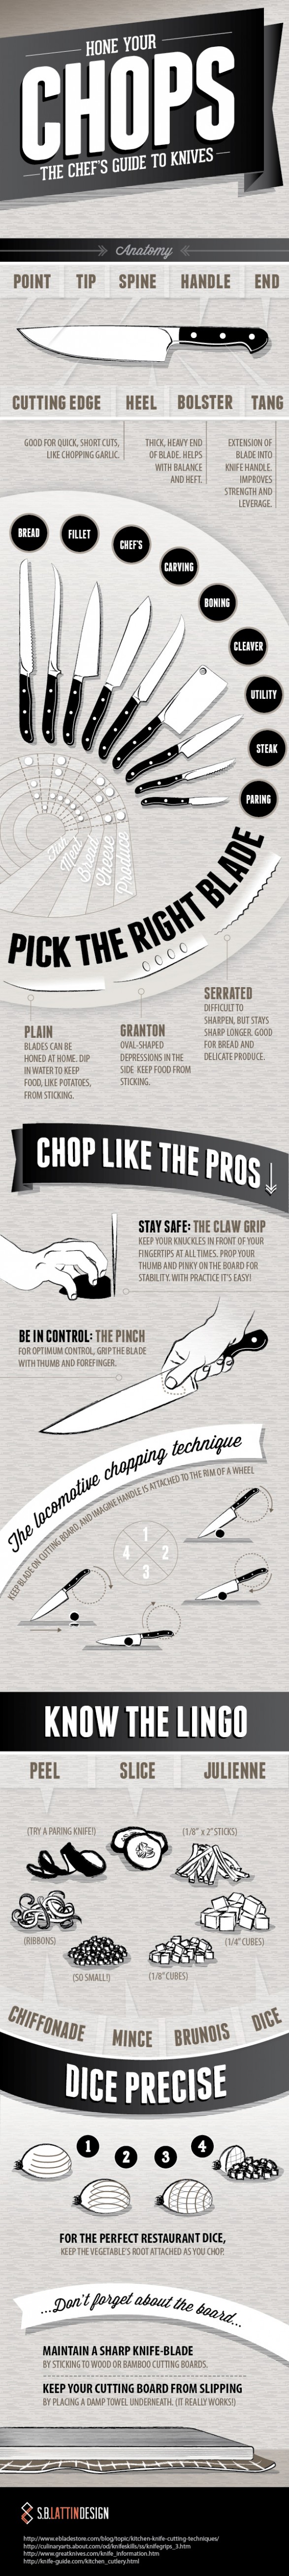 Hone Your Chops: The Chef